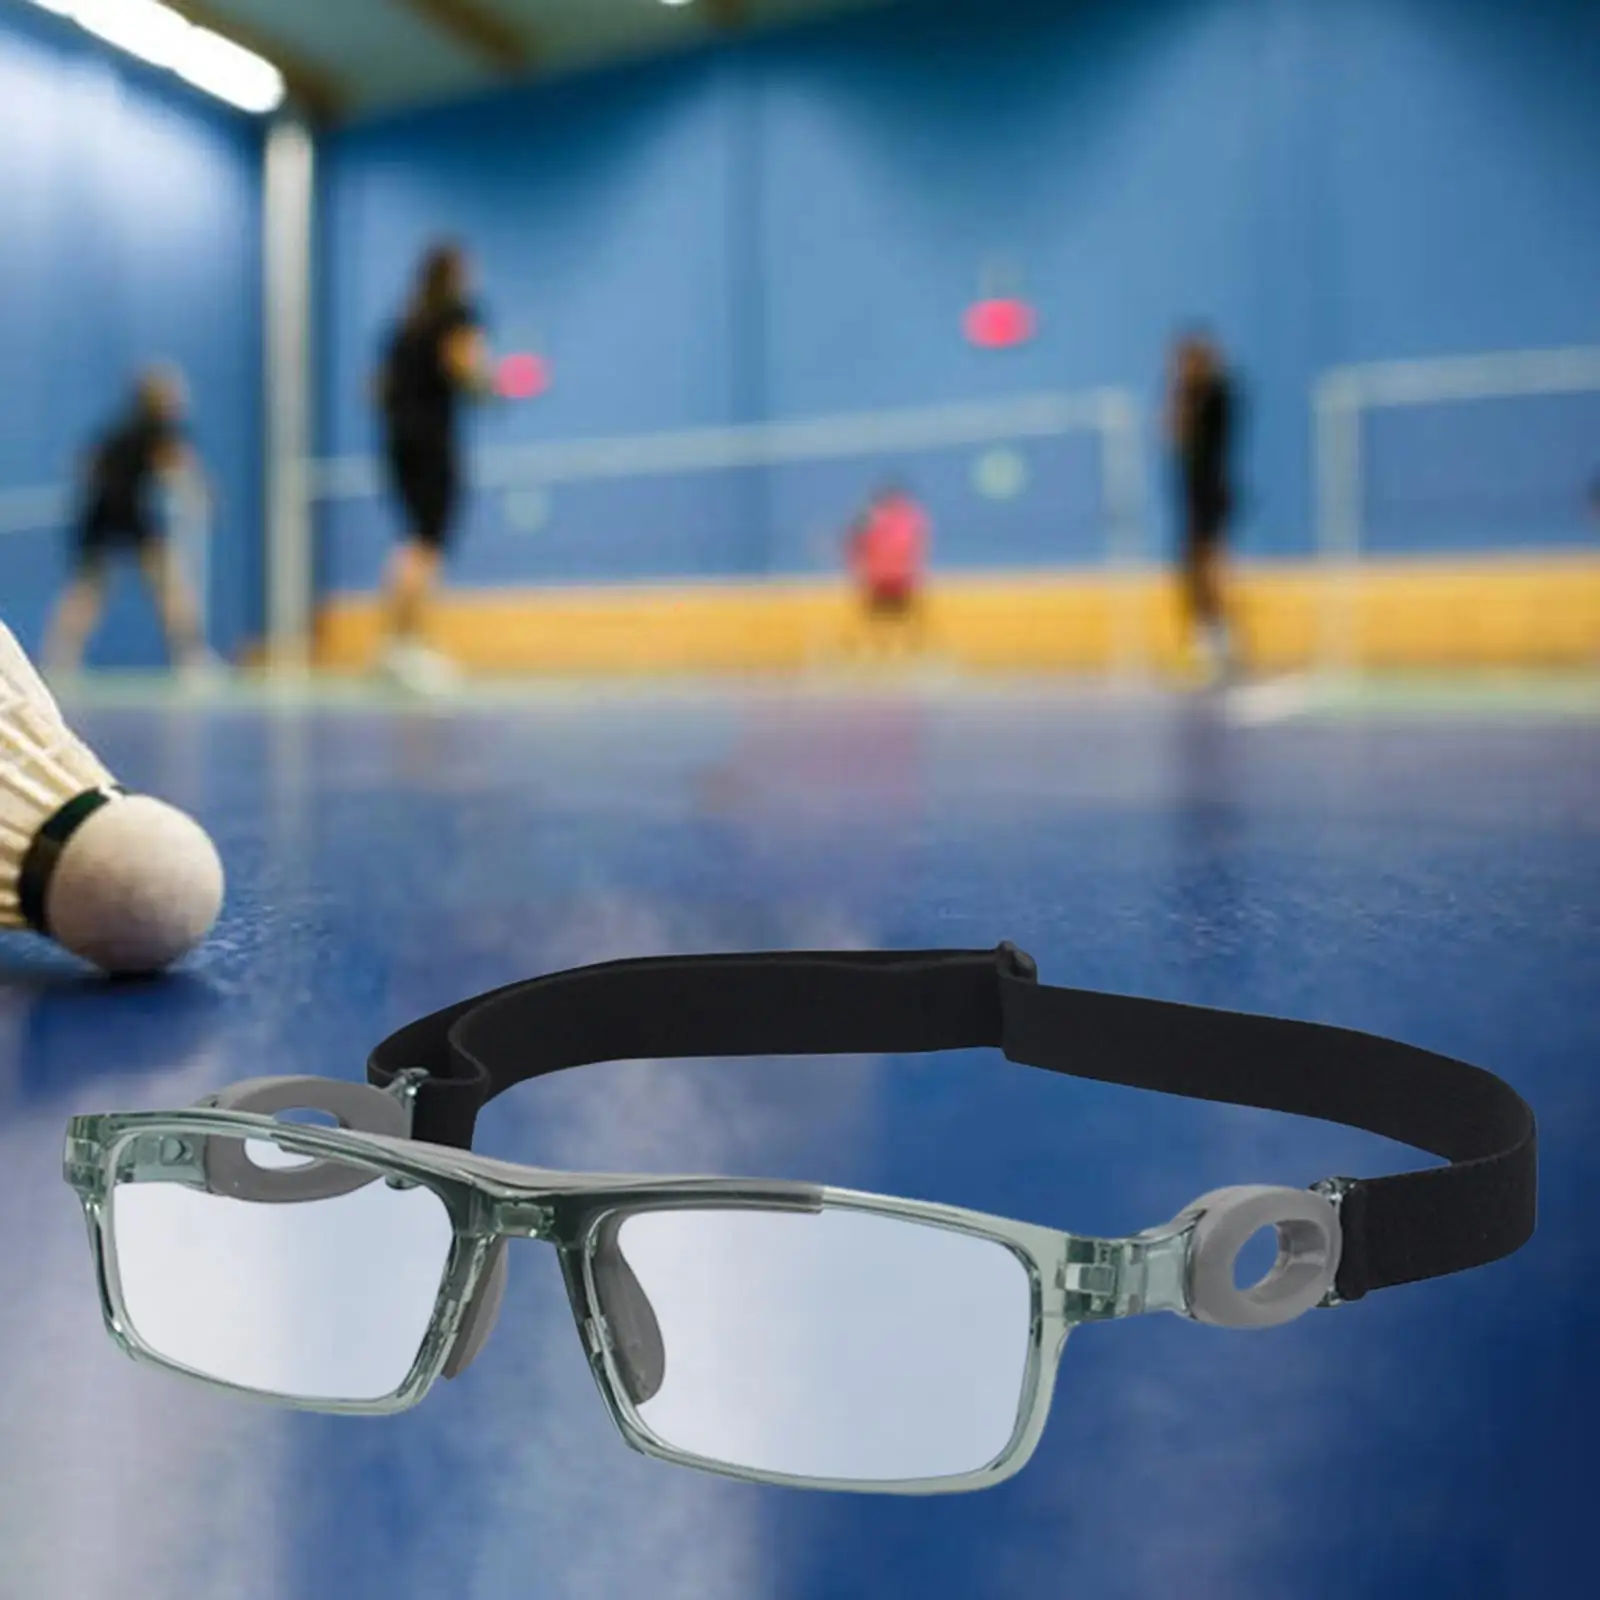 Professional Basketball Glasses Lightweight Wearable for Cycling Tennis